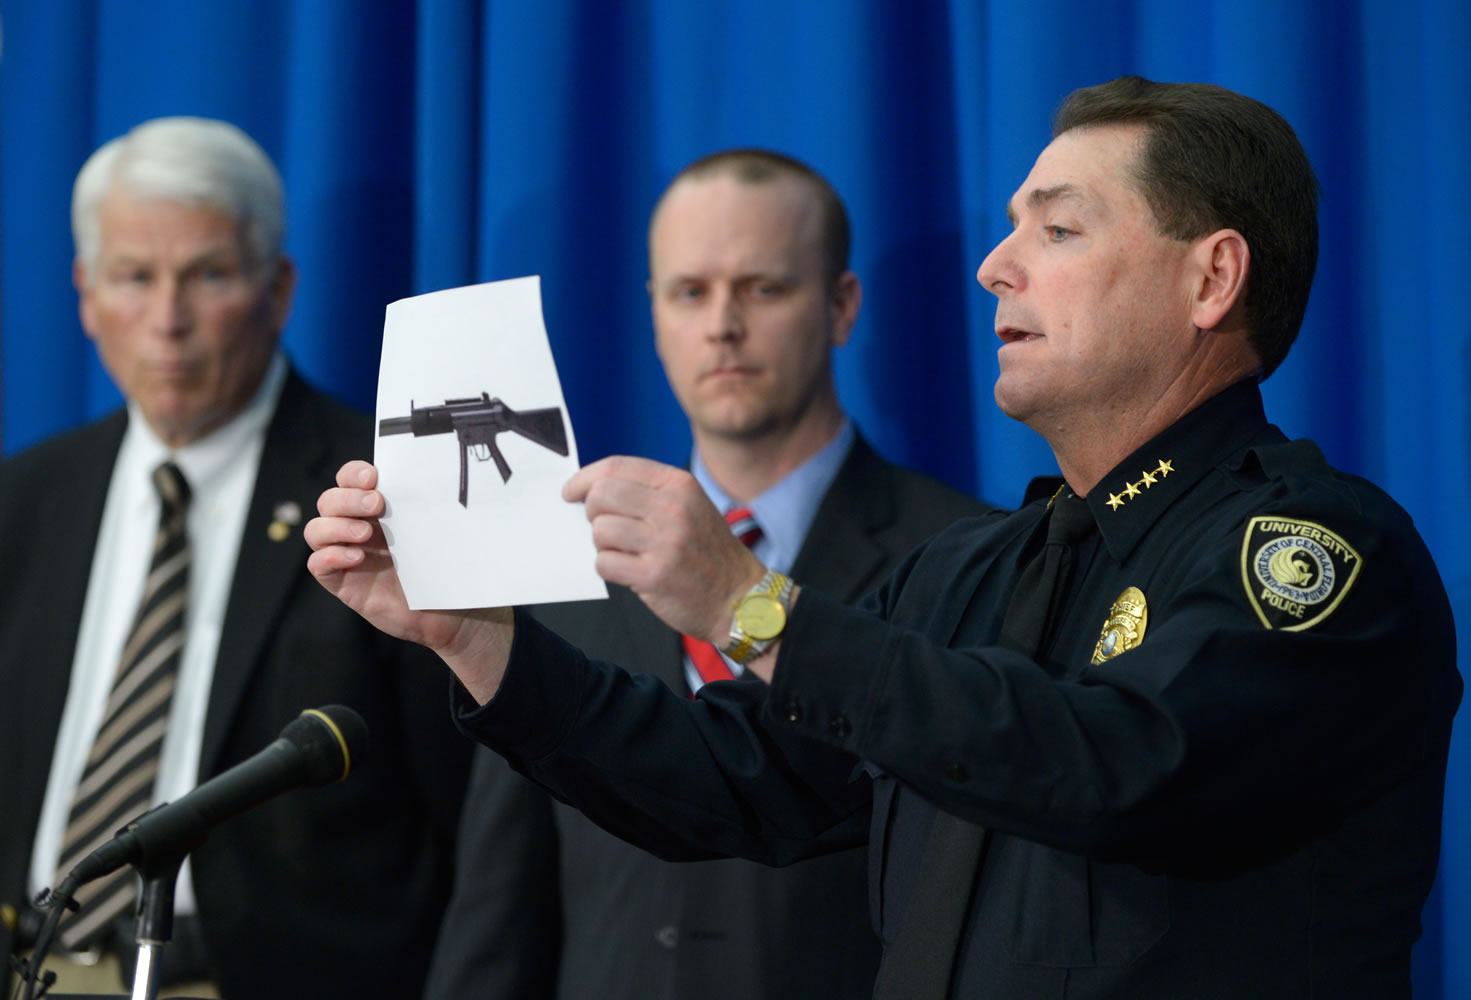 University of Central Florida police Chief Richard Beary, right, shows an example of the assault rifle, along with explosive devices, found in the dorm room of James Oliver Seevakumaran, who died of an apparent suicide in the room Monday in Orlando, Fla.